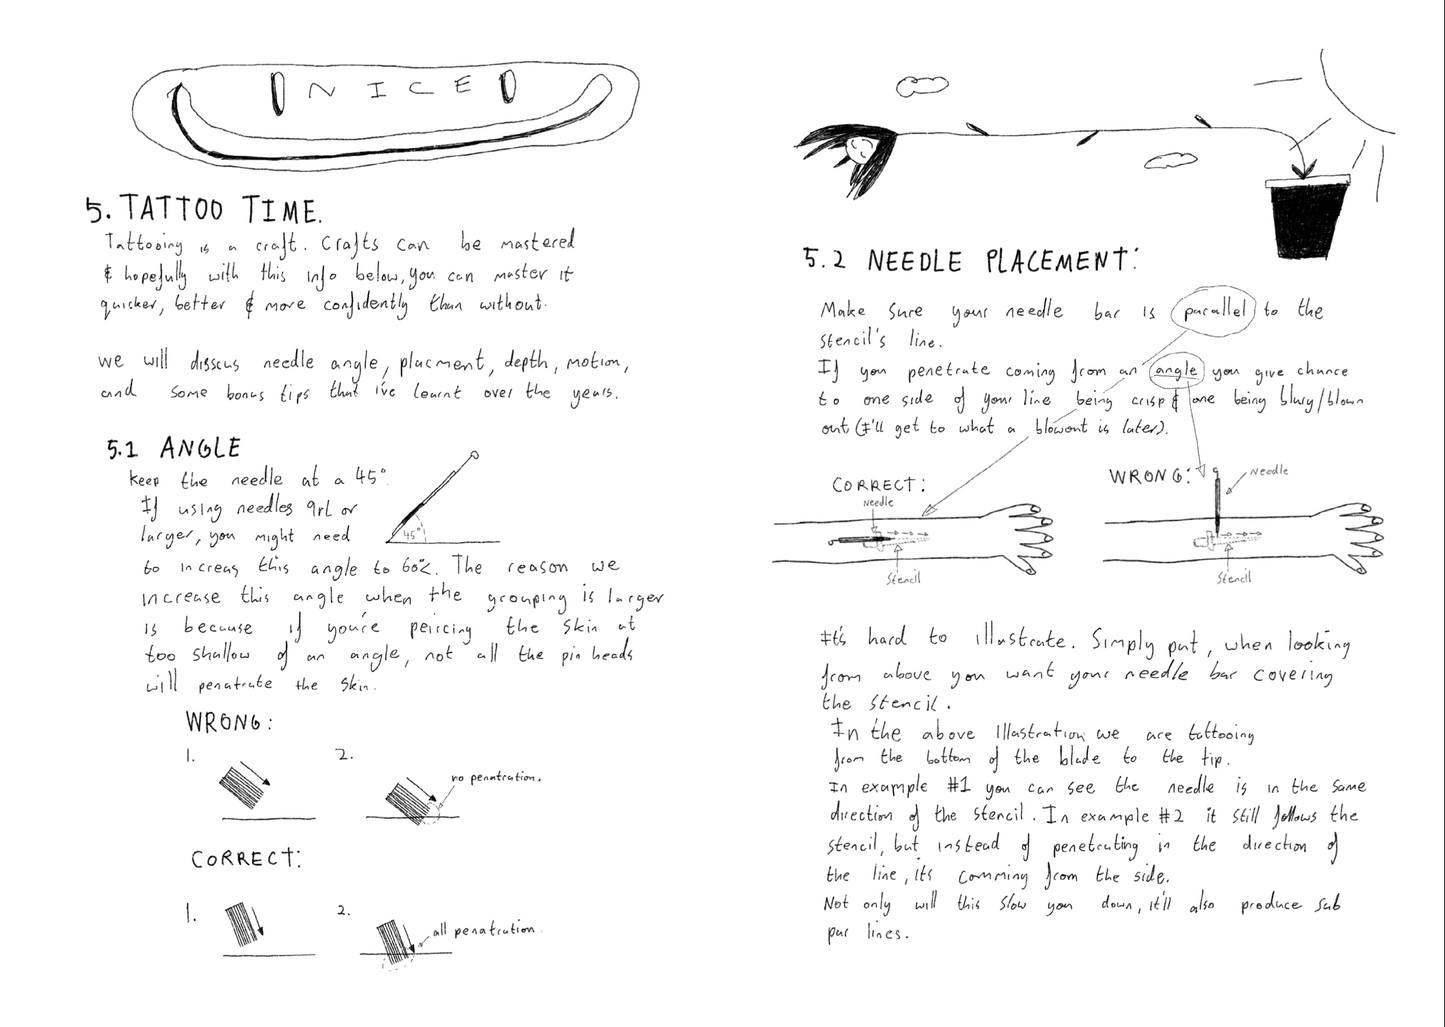 How to tattoo: A stick and poke guide (digital copy)